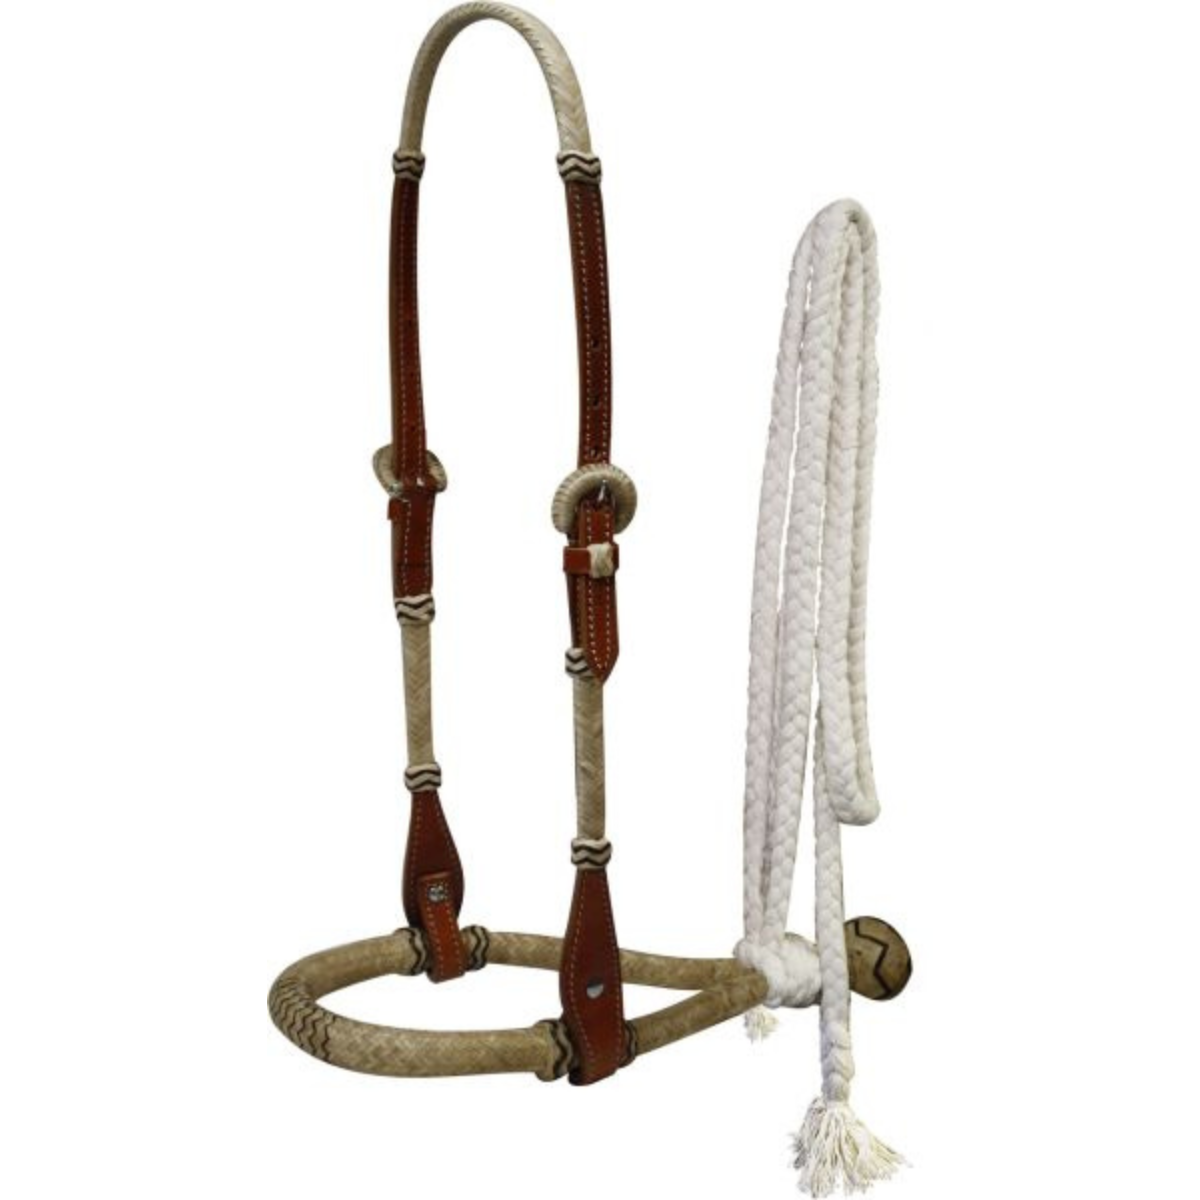 Showman ® leather rawhide braided show bosal with mecate cotton reins. - Double T Saddles